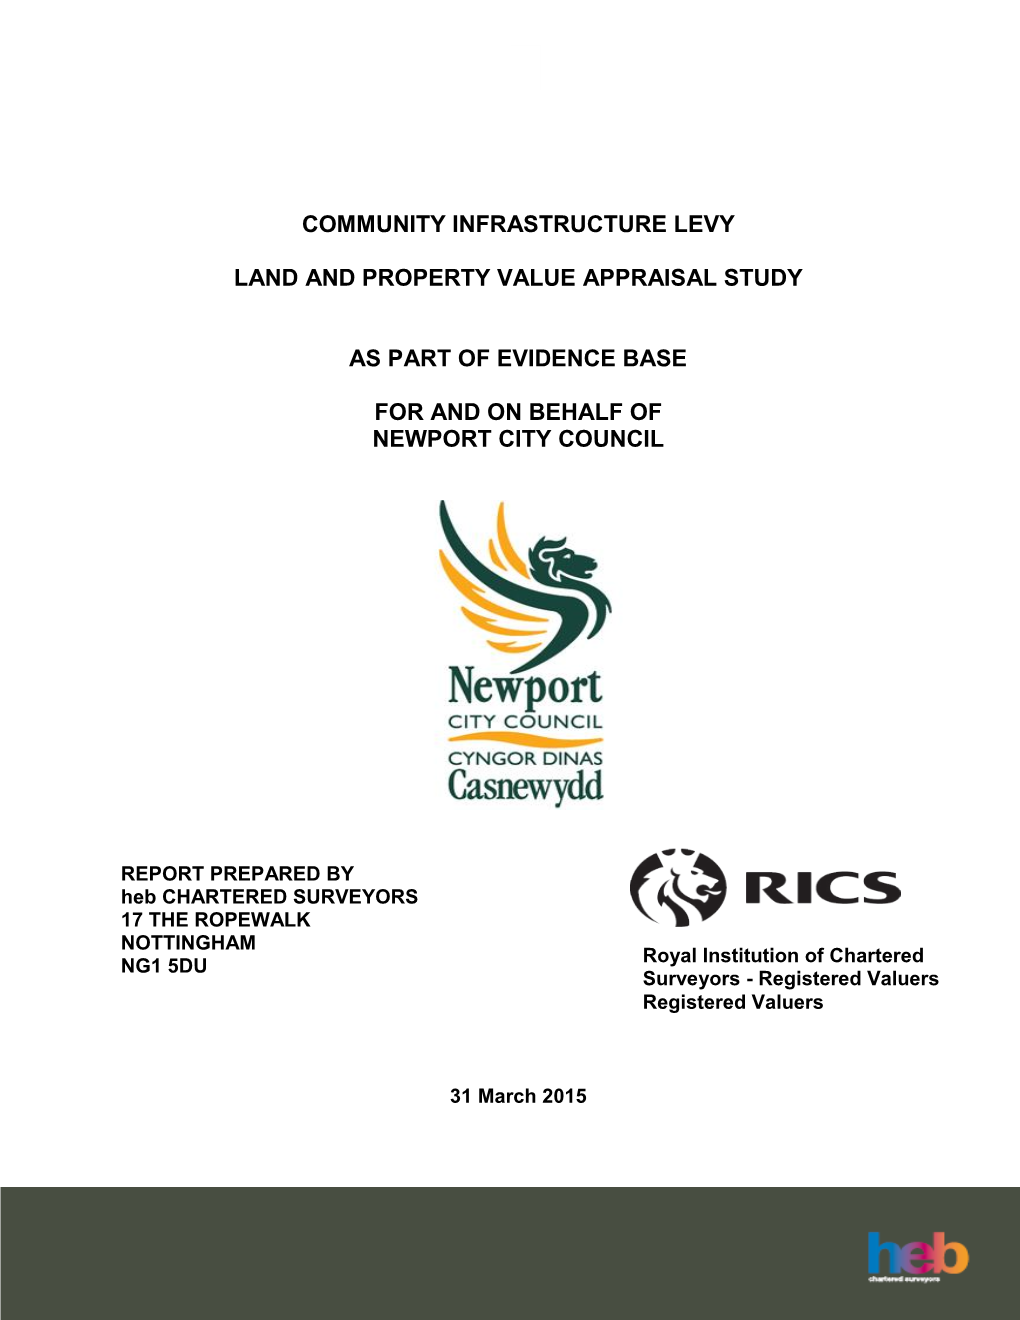 Community Infrastructure Levy Land and Property